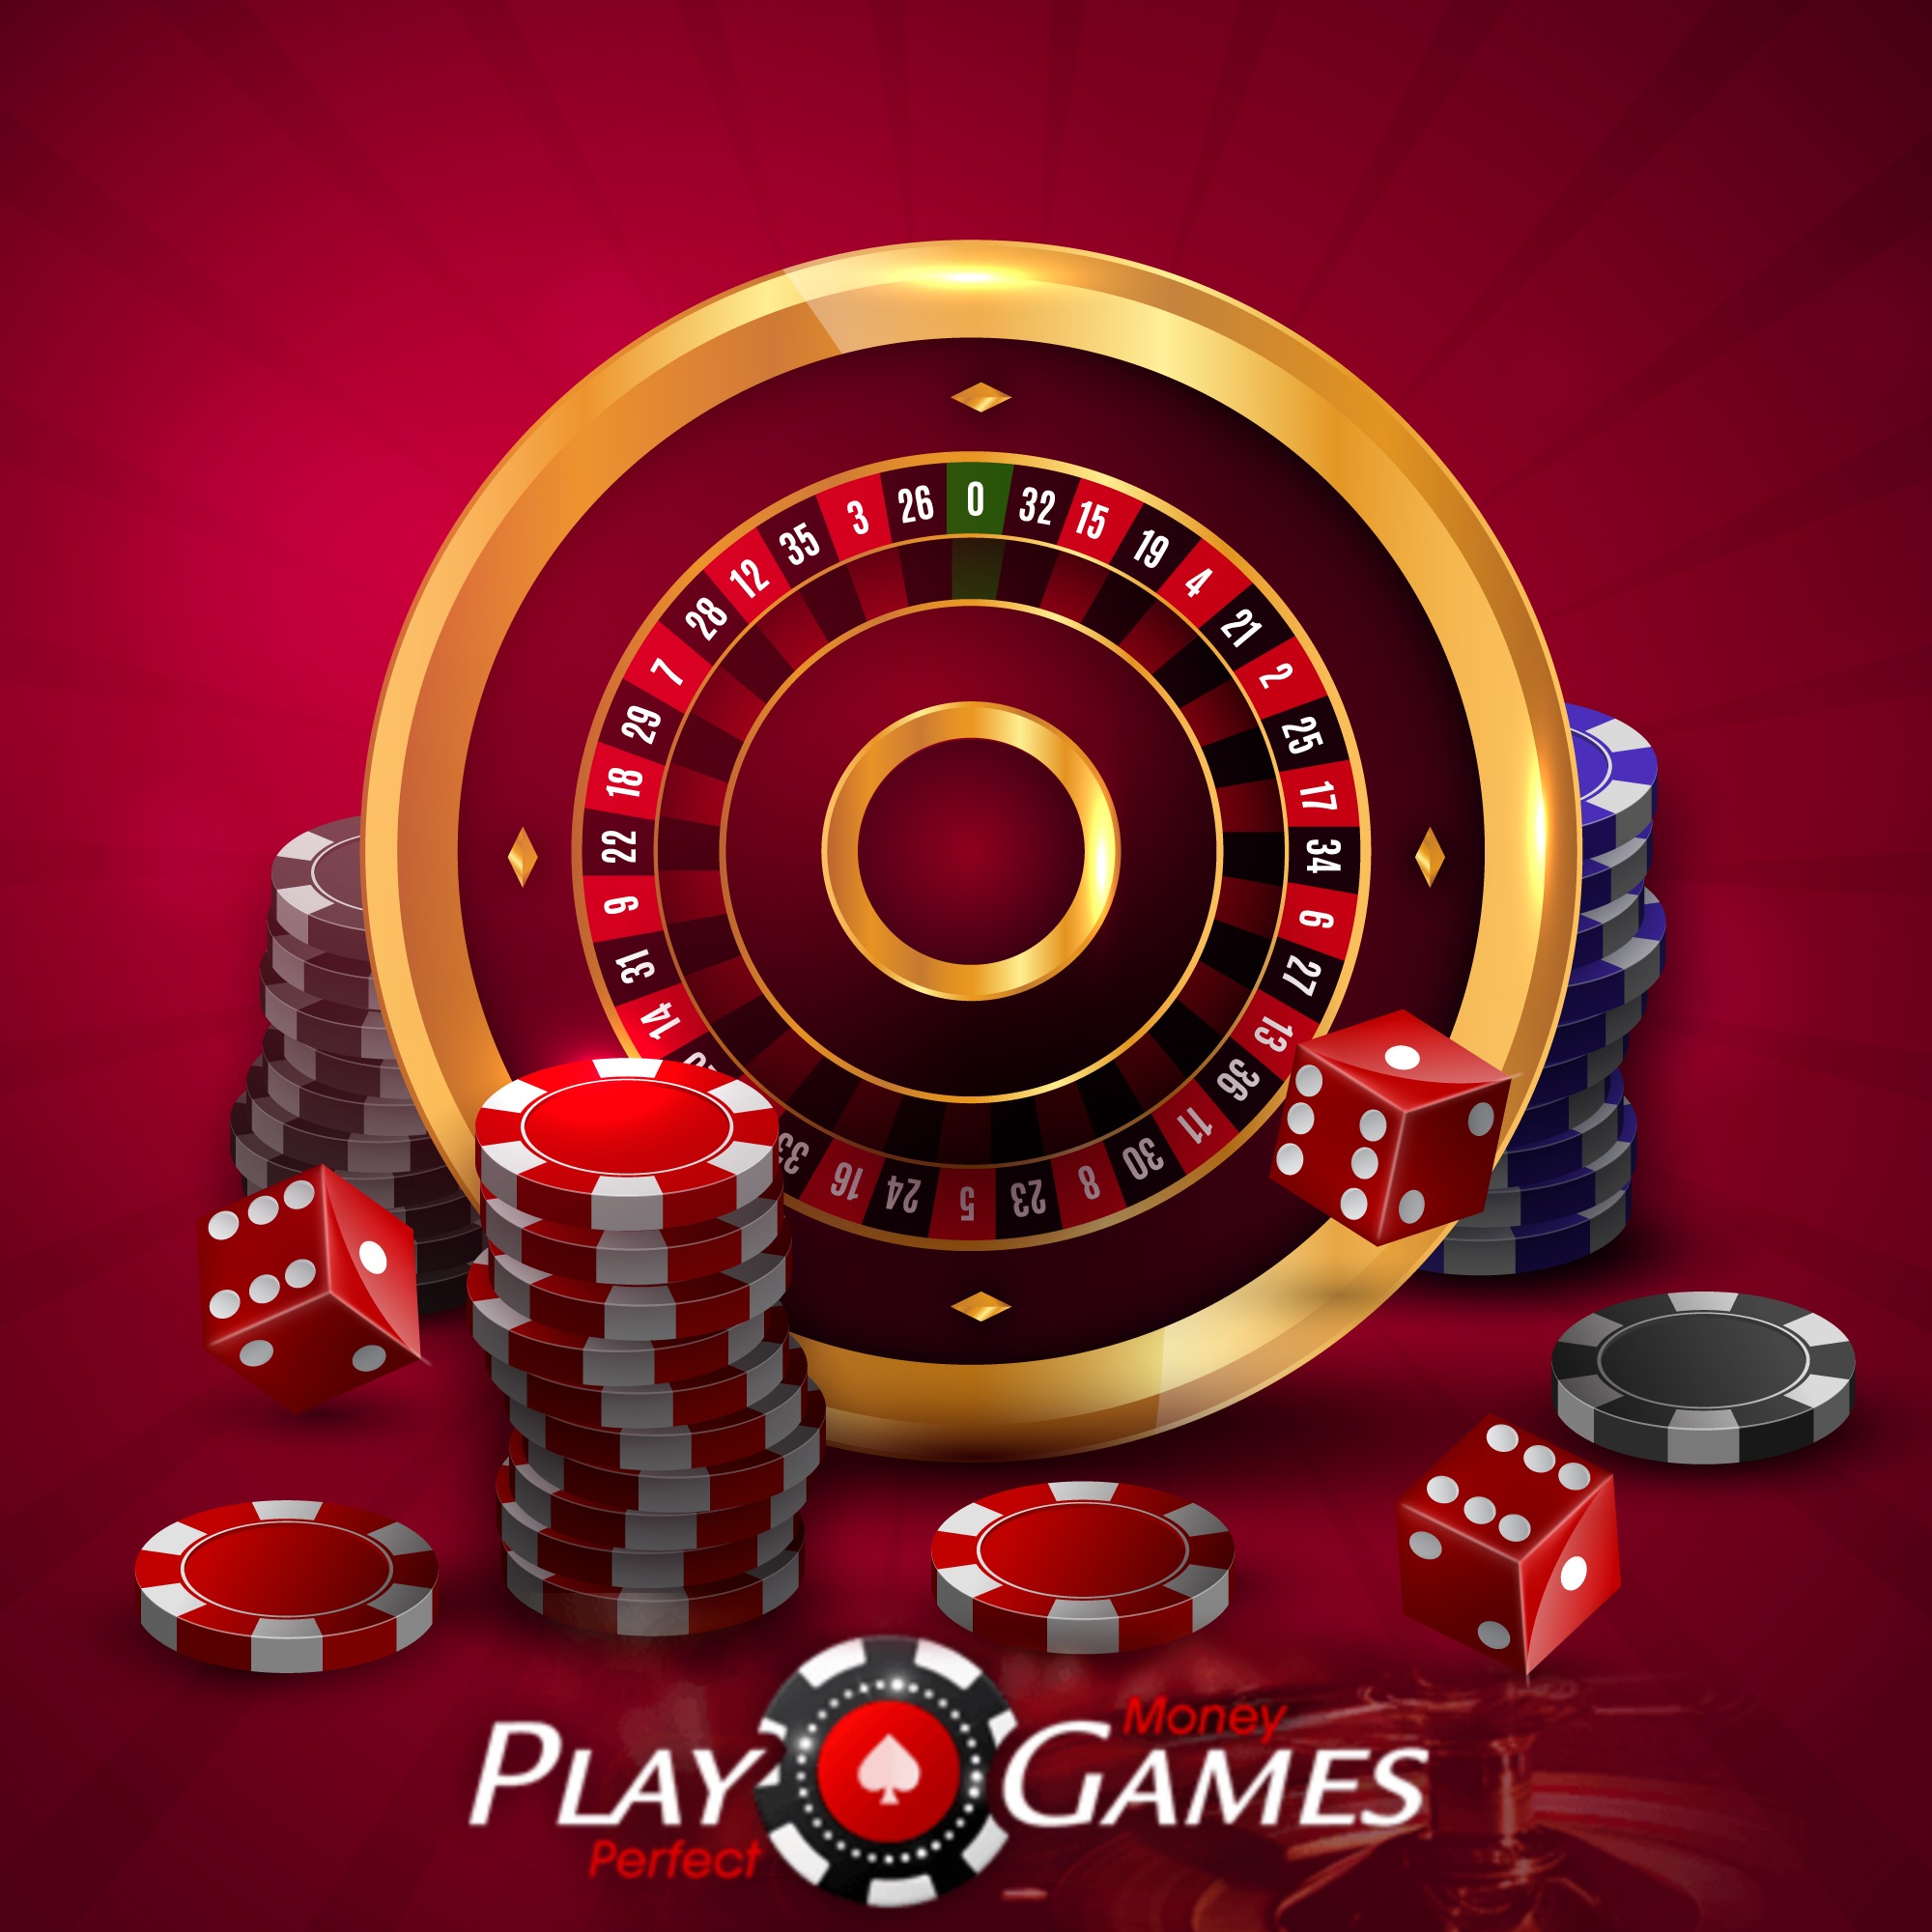 Play Perfect Money Games the first Casino with no signup or registration required with instant cash outs, and all casino games online.https://playperfectmoneygames.com/